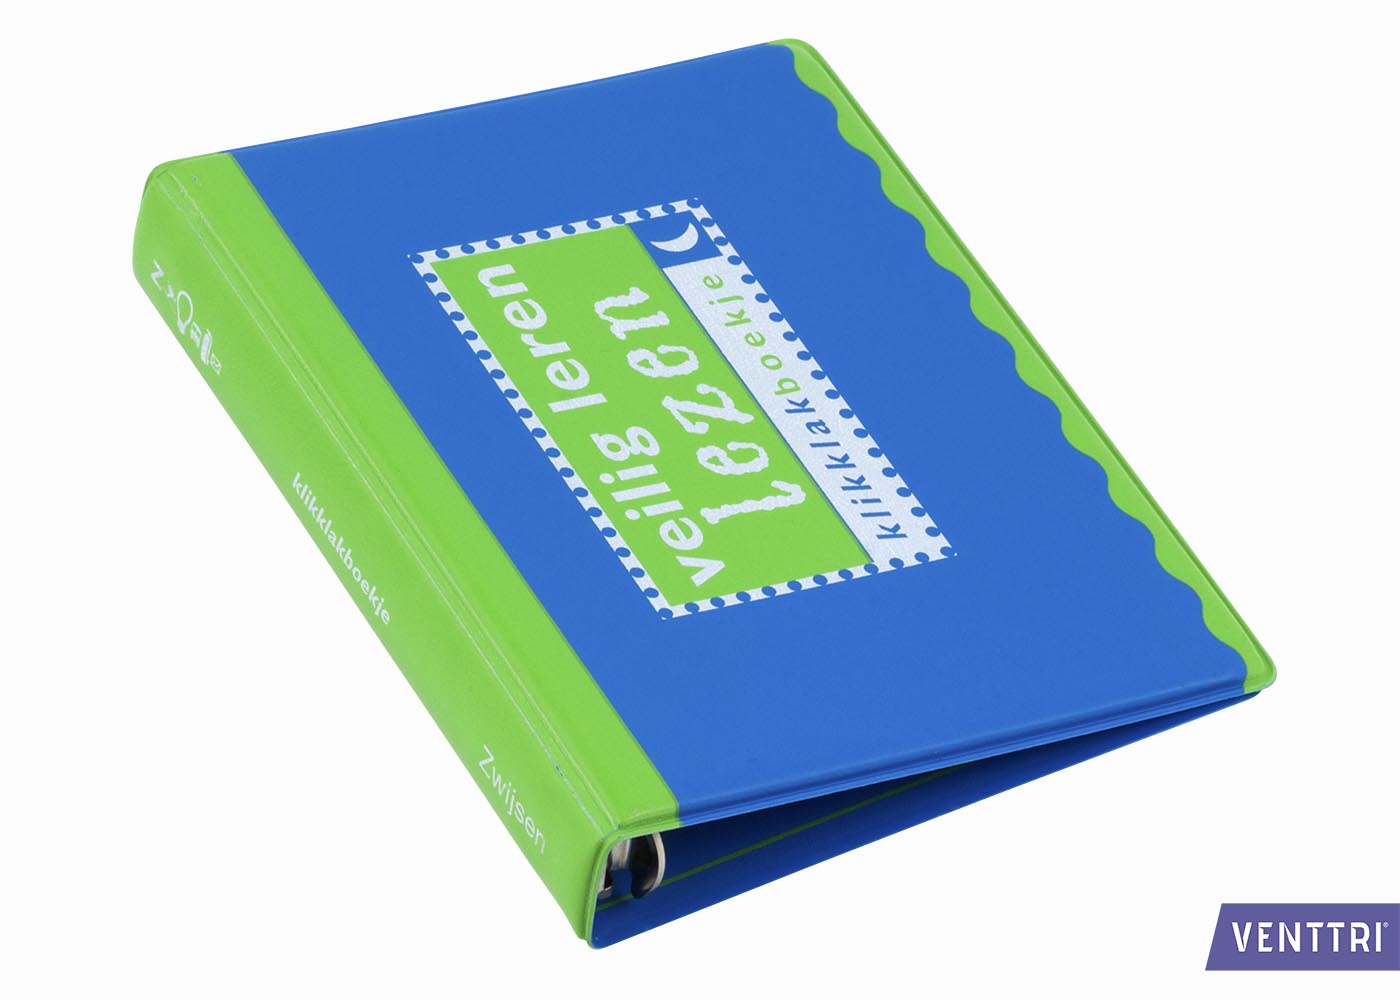 Zaailing sleuf overal A6 binder with logo - Venttri